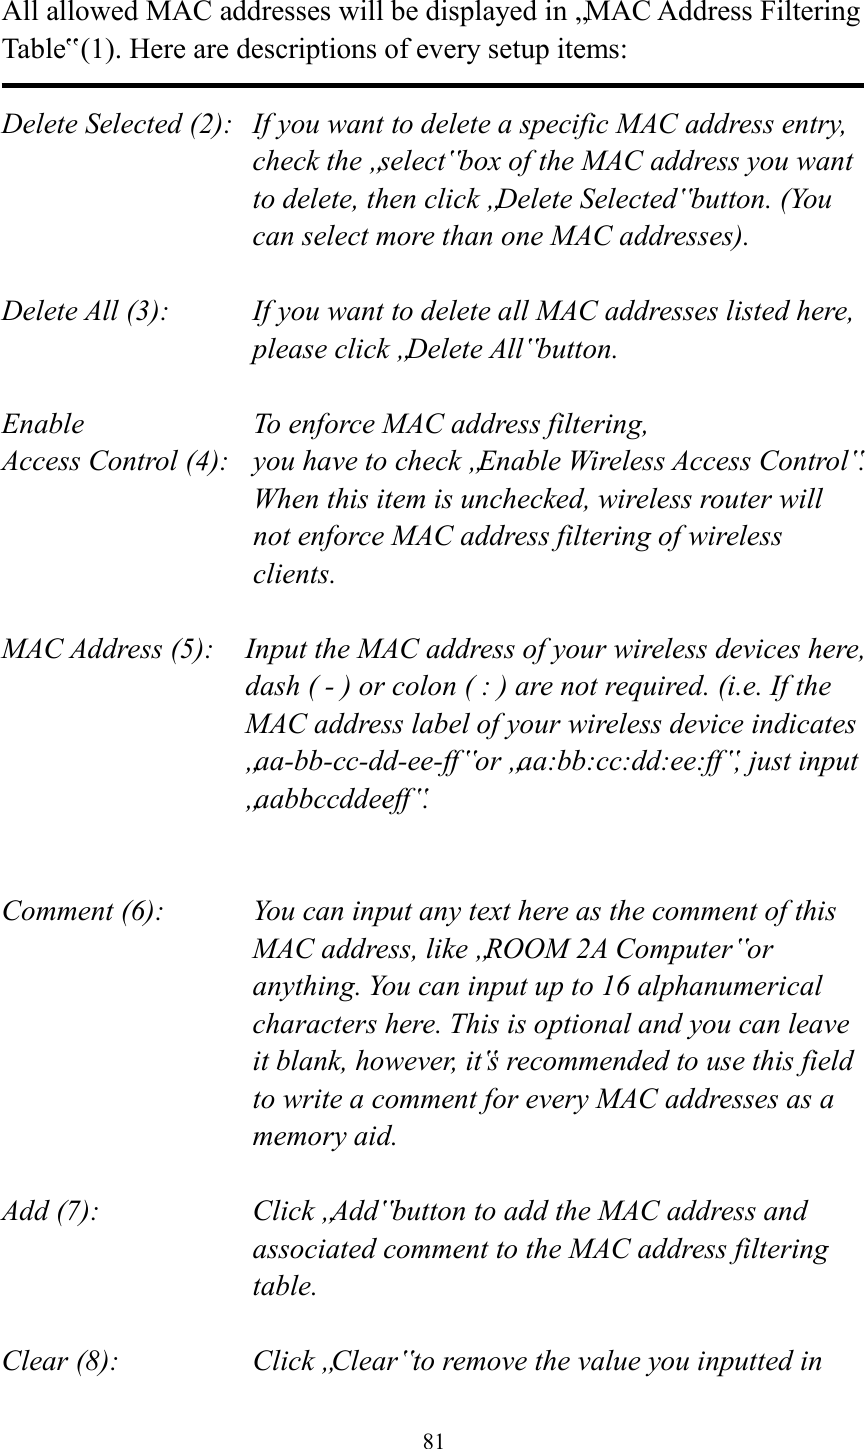  81  All allowed MAC addresses will be displayed in „MAC Address Filtering Table‟ (1). Here are descriptions of every setup items:  Delete Selected (2):   If you want to delete a specific MAC address entry, check the „select‟ box of the MAC address you want to delete, then click „Delete Selected‟ button. (You can select more than one MAC addresses).  Delete All (3):    If you want to delete all MAC addresses listed here, please click „Delete All‟ button.  Enable      To enforce MAC address filtering, Access Control (4):   you have to check „Enable Wireless Access Control‟. When this item is unchecked, wireless router will not enforce MAC address filtering of wireless clients.  MAC Address (5):    Input the MAC address of your wireless devices here, dash ( - ) or colon ( : ) are not required. (i.e. If the MAC address label of your wireless device indicates „aa-bb-cc-dd-ee-ff ‟ or „aa:bb:cc:dd:ee:ff ‟, just input „aabbccddeeff‟.   Comment (6):      You can input any text here as the comment of this       MAC address, like „ROOM 2A Computer‟ or         anything. You can input up to 16 alphanumerical   characters here. This is optional and you can leave   it blank, however, it‟s recommended to use this field   to write a comment for every MAC addresses as a   memory aid.  Add (7):    Click „Add‟ button to add the MAC address and associated comment to the MAC address filtering table.  Clear (8):    Click „Clear‟ to remove the value you inputted in 